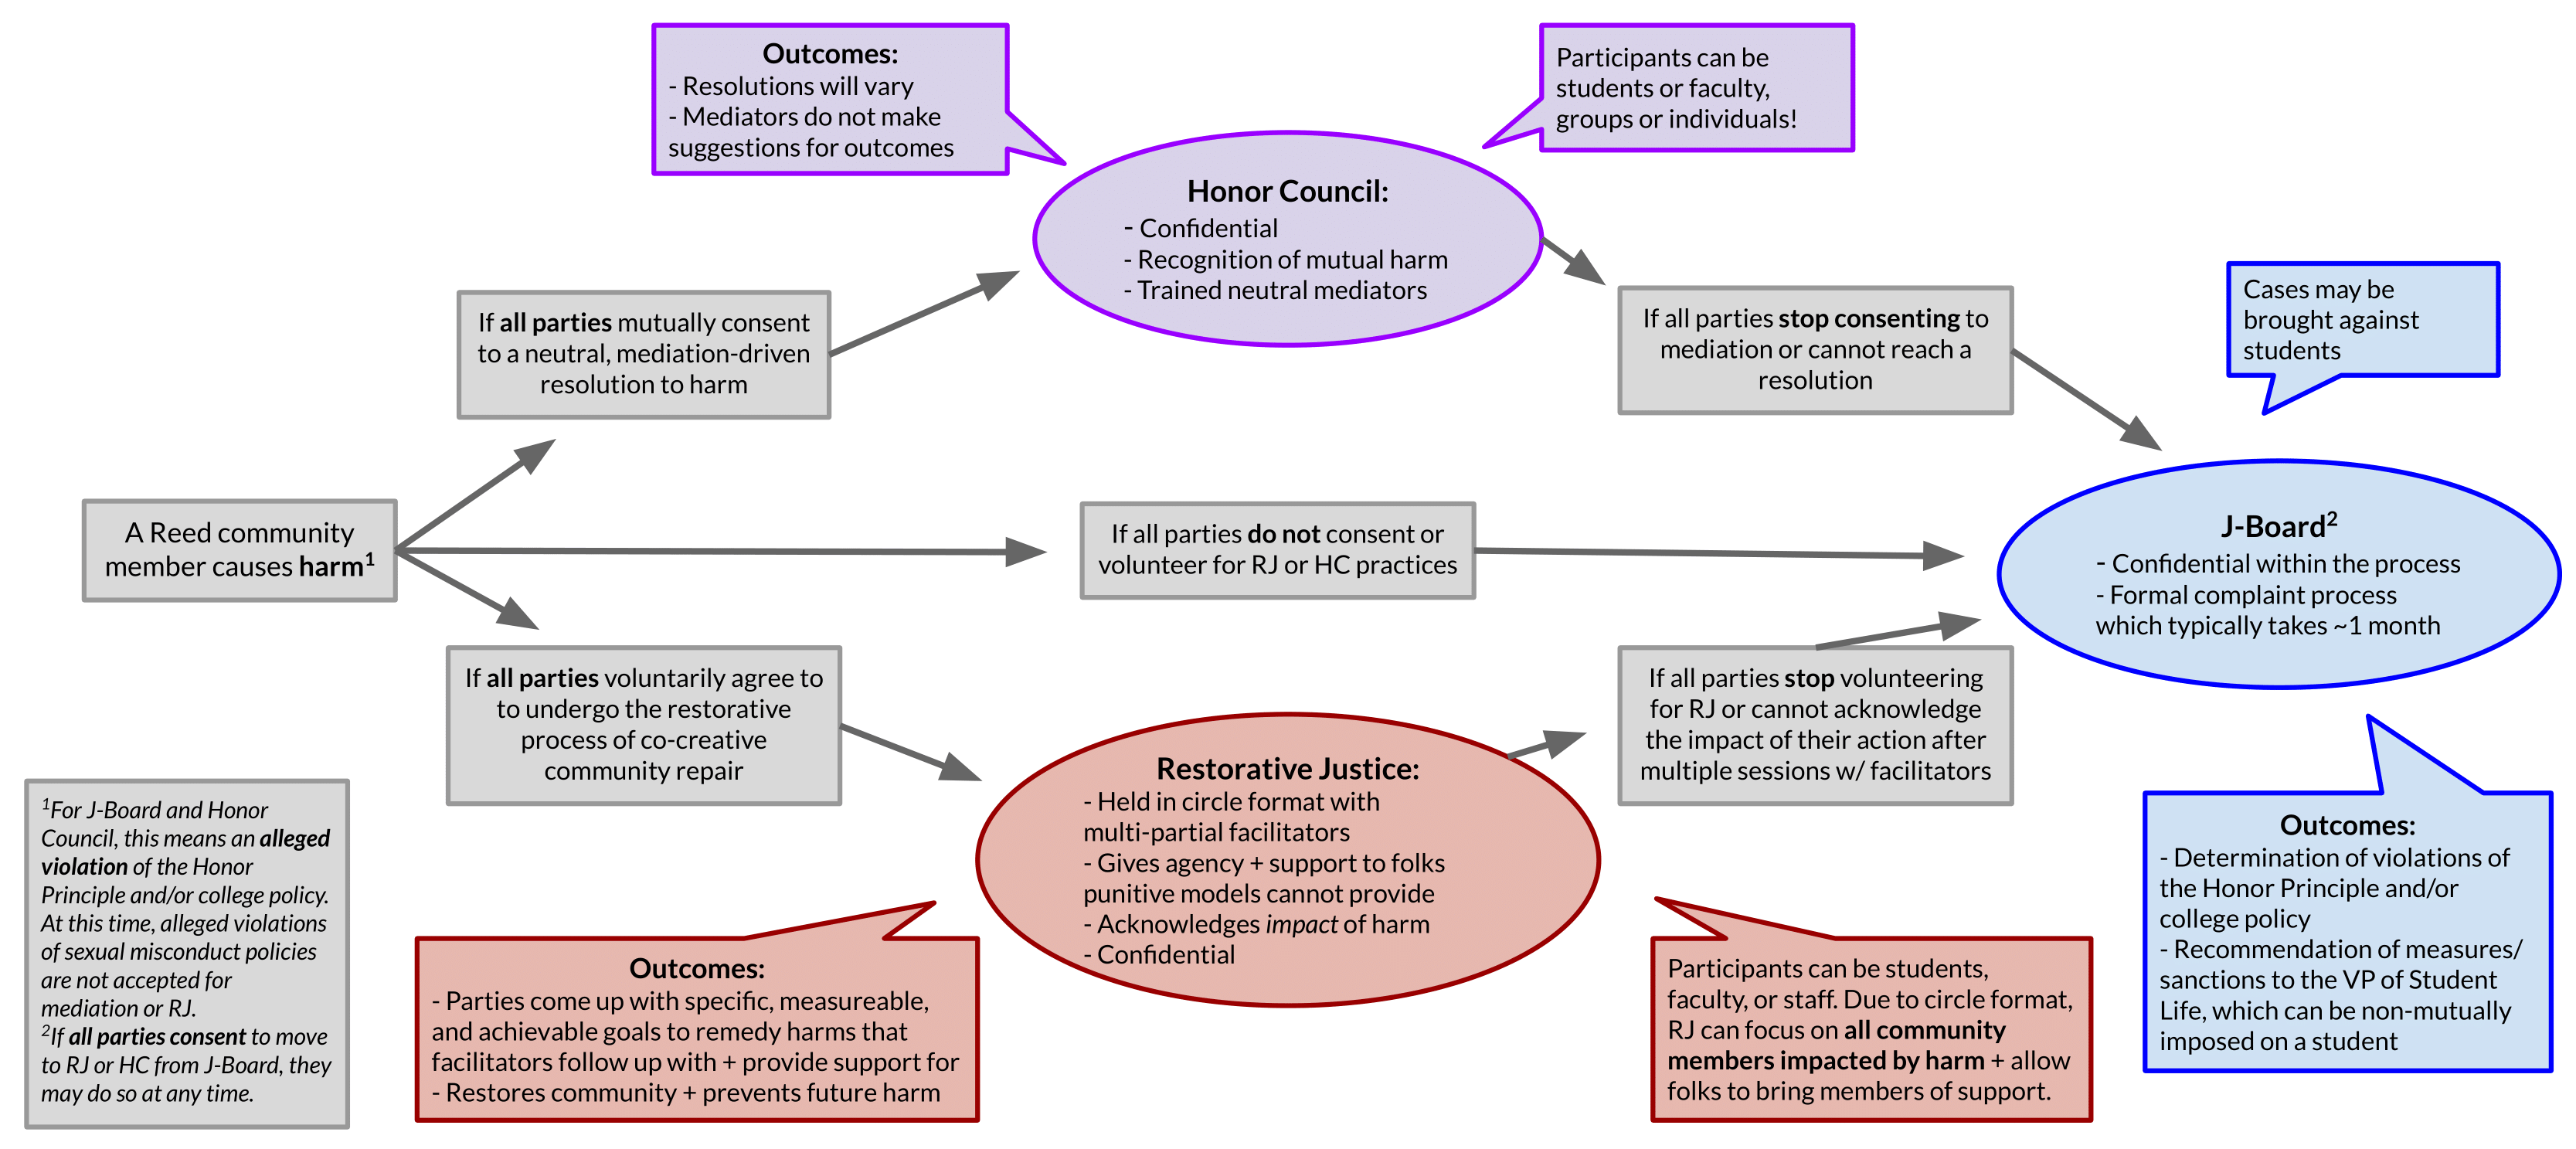 flowchart explaining the roles of each of the judicial review processes